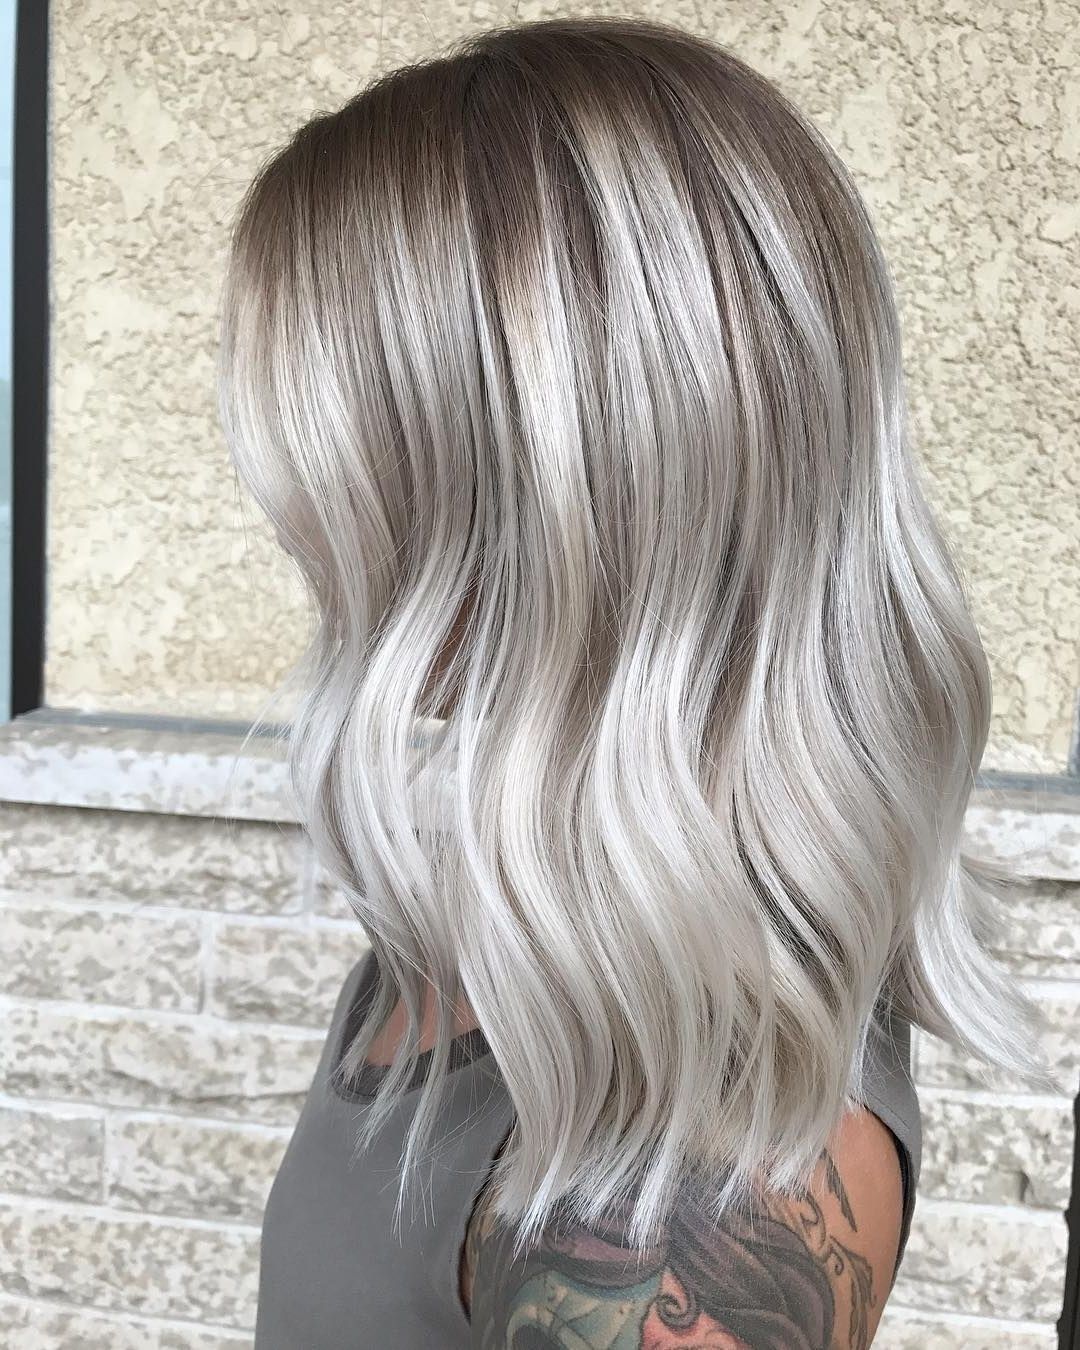 Best And Newest Dark Brown Hair Hairstyles With Silver Blonde Highlights Regarding 10 Ash Blonde Hairstyles For All Skin Tones, 2018 Best Hair Color Trends (Gallery 20 of 20)